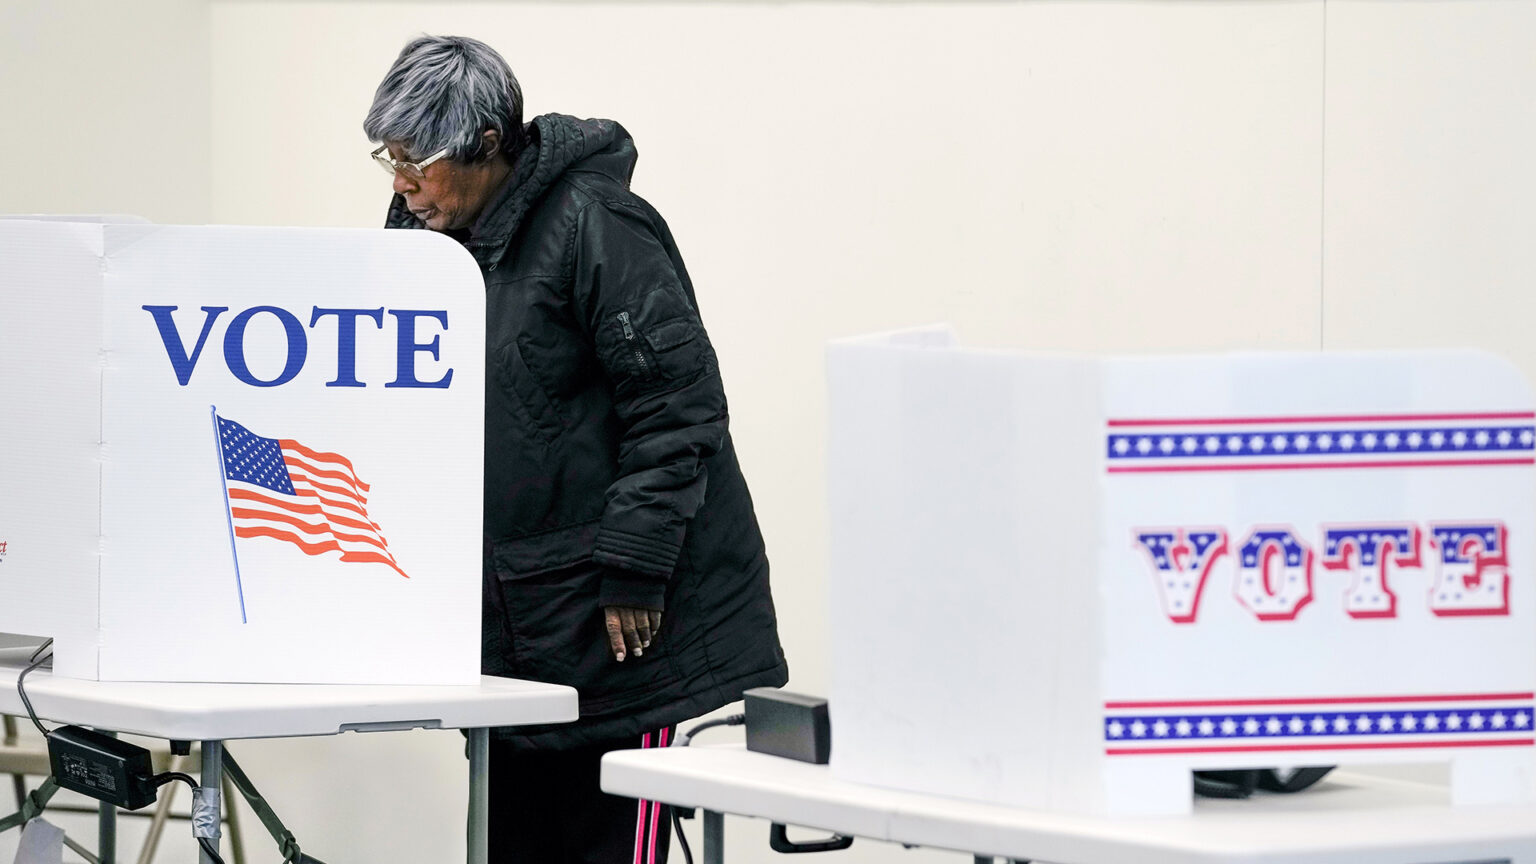 A voter stands behind a privacy screen mounted on a folding plastic table with a graphic of the U.S. flag and the word VOTE and casts a ballot, with another table with a similar screen and different graphic in the foreground.